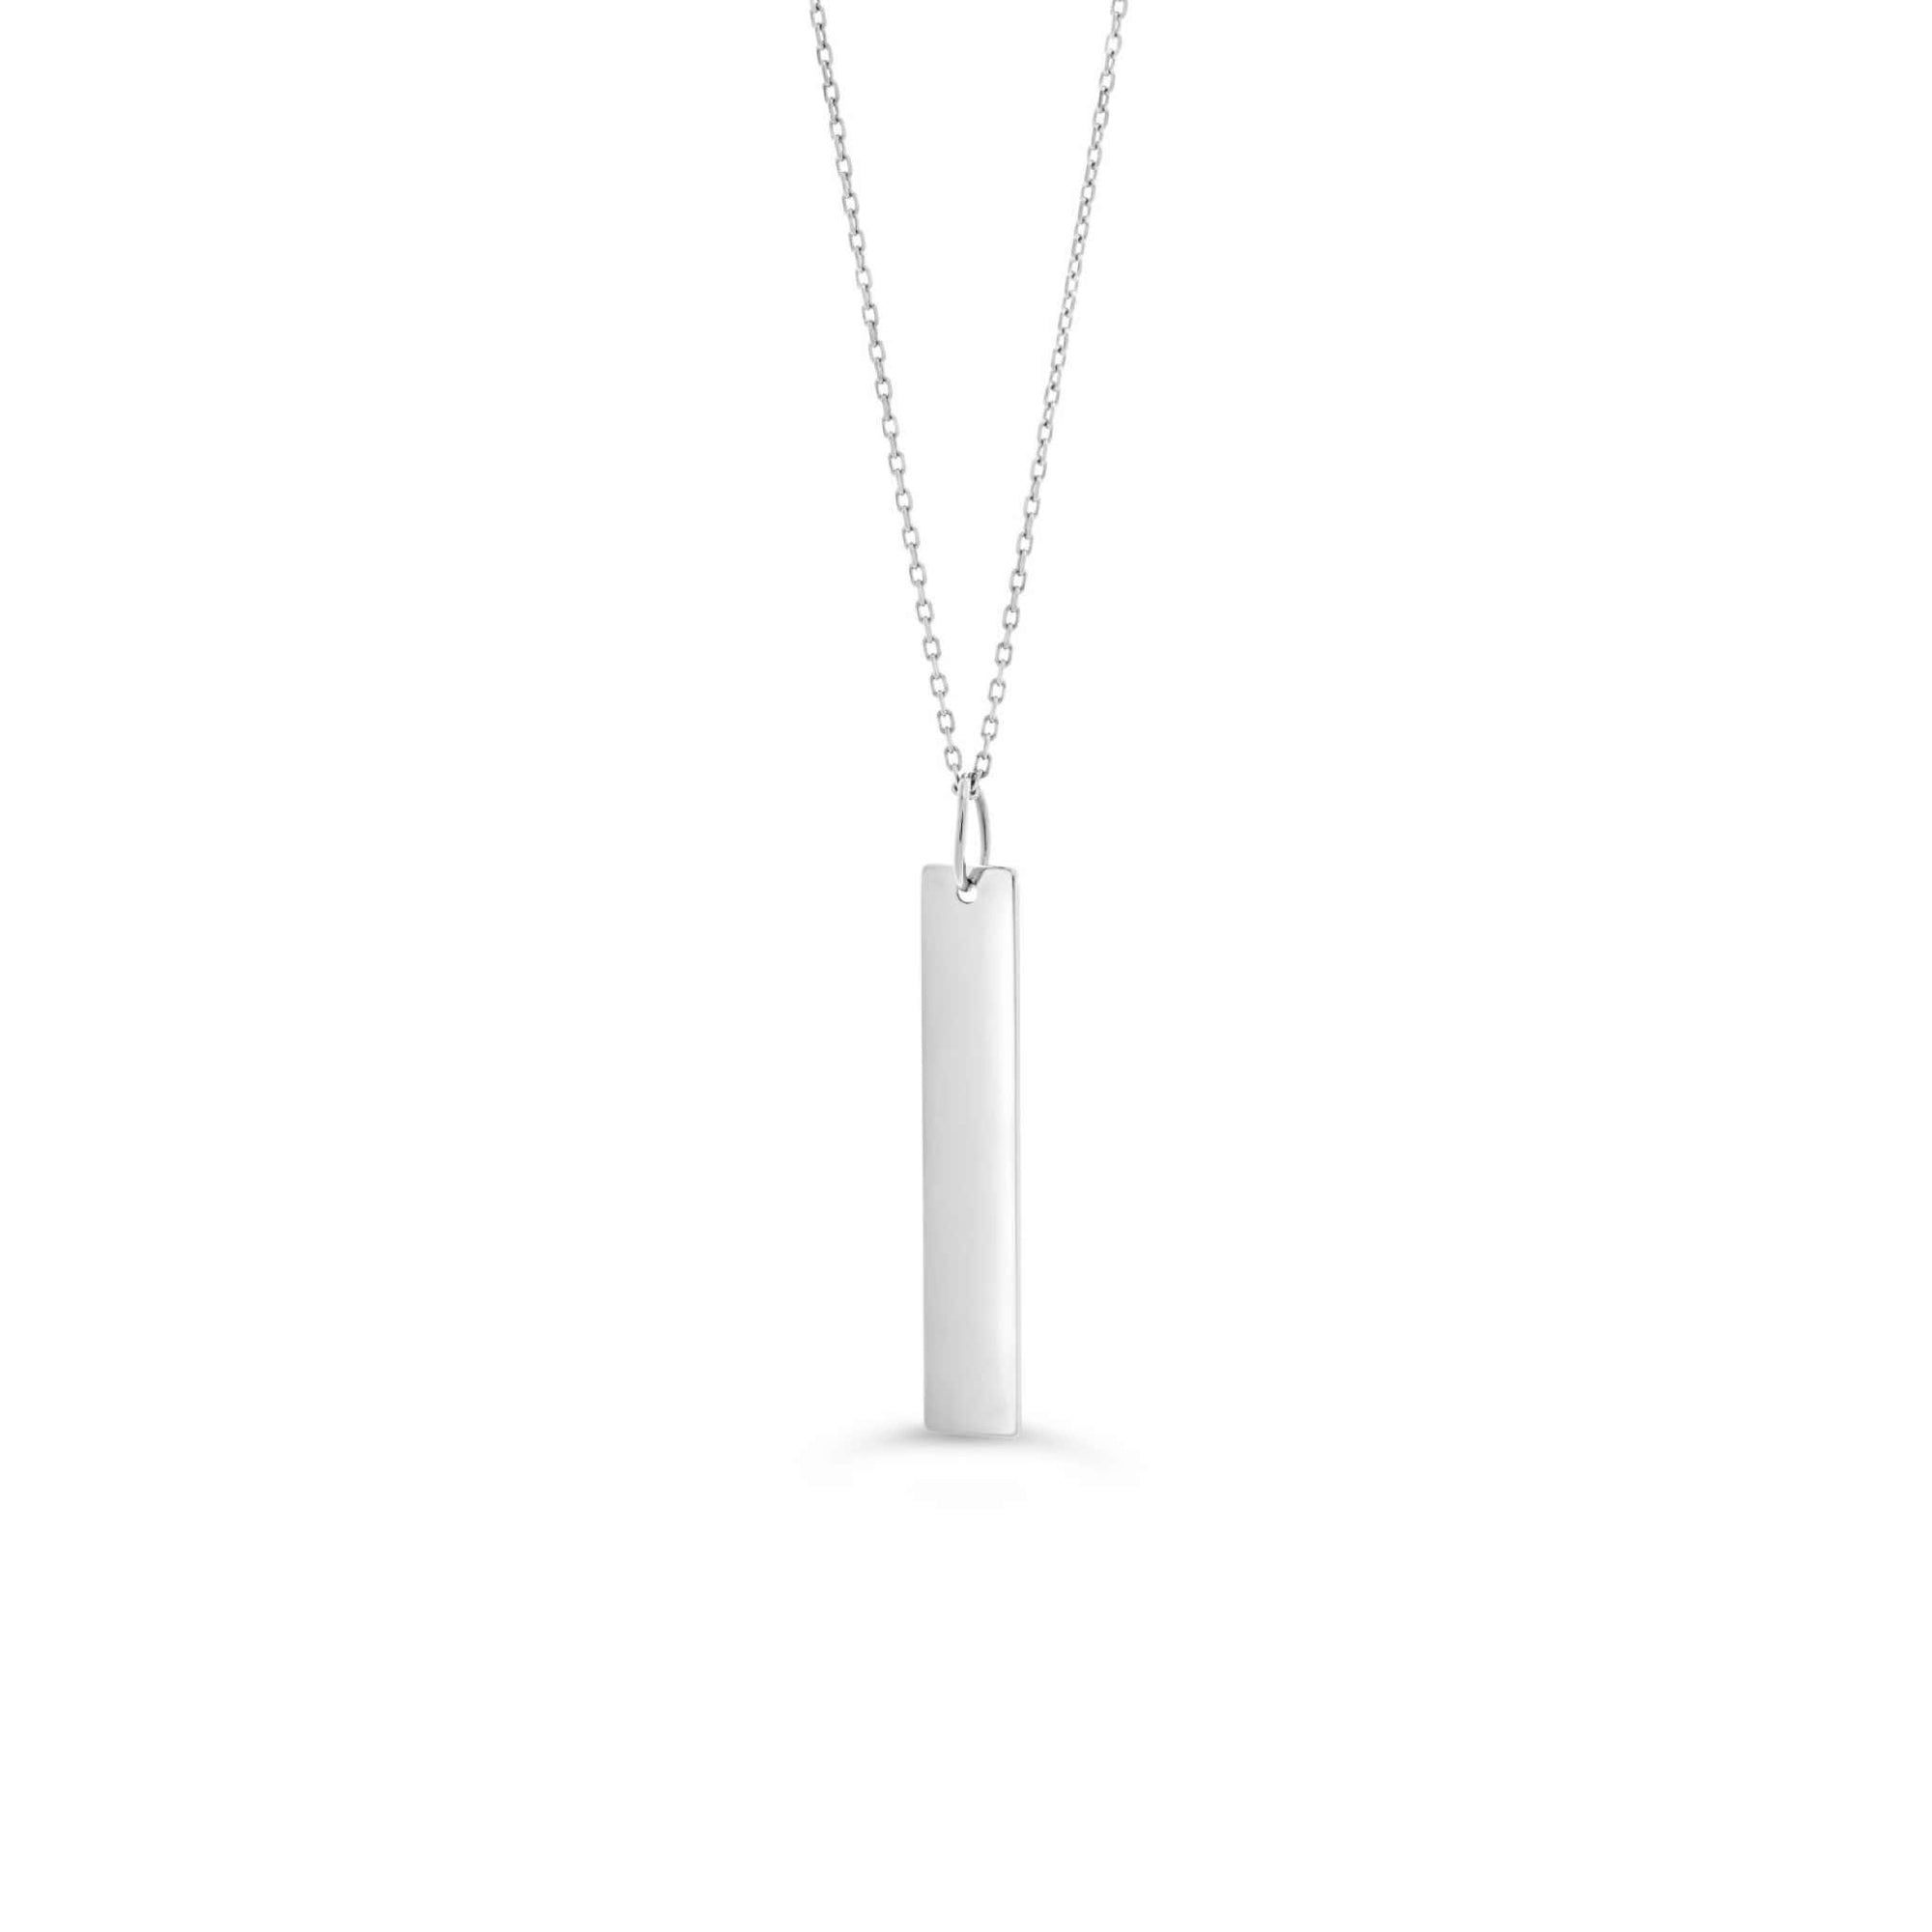 10K Yellow Gold Vertical Bar Necklace at Arman's Jewellers Kitchener